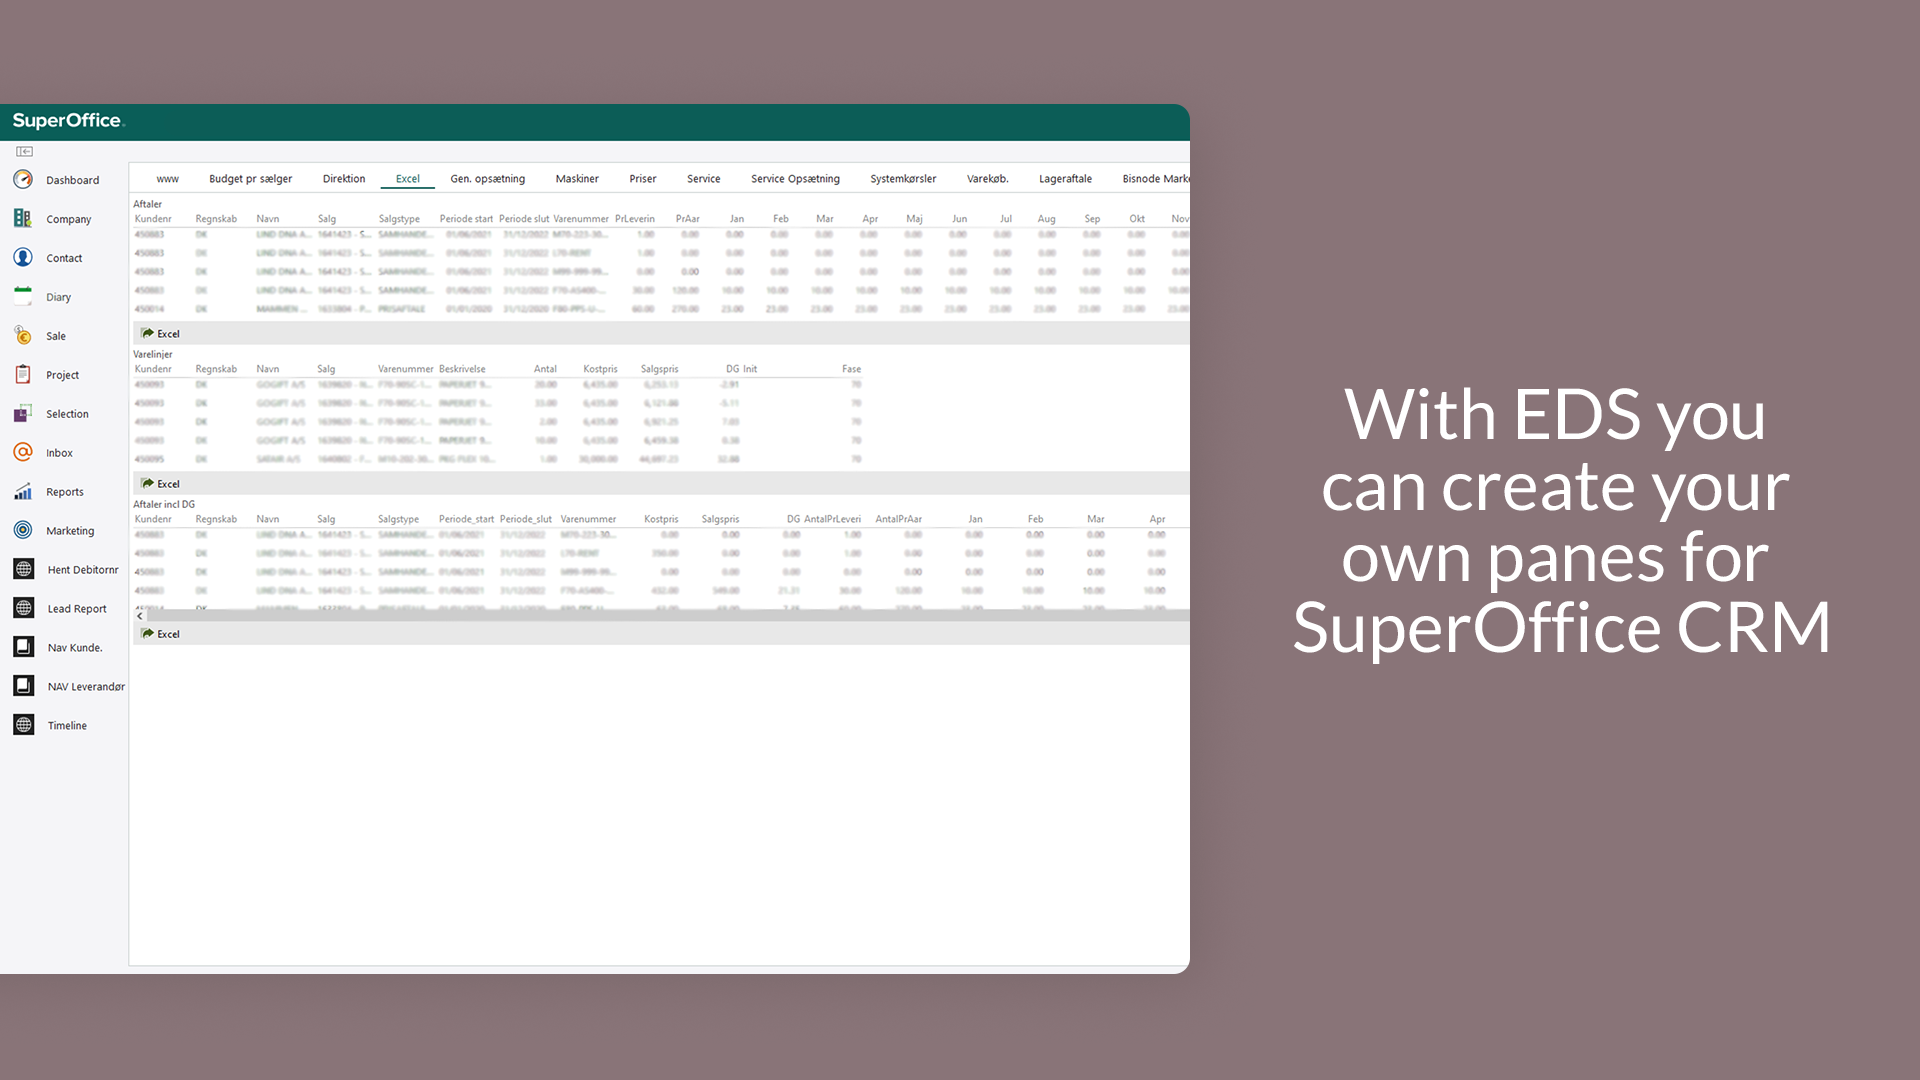 With EDS you can create your own panes for SuperOffice CRM